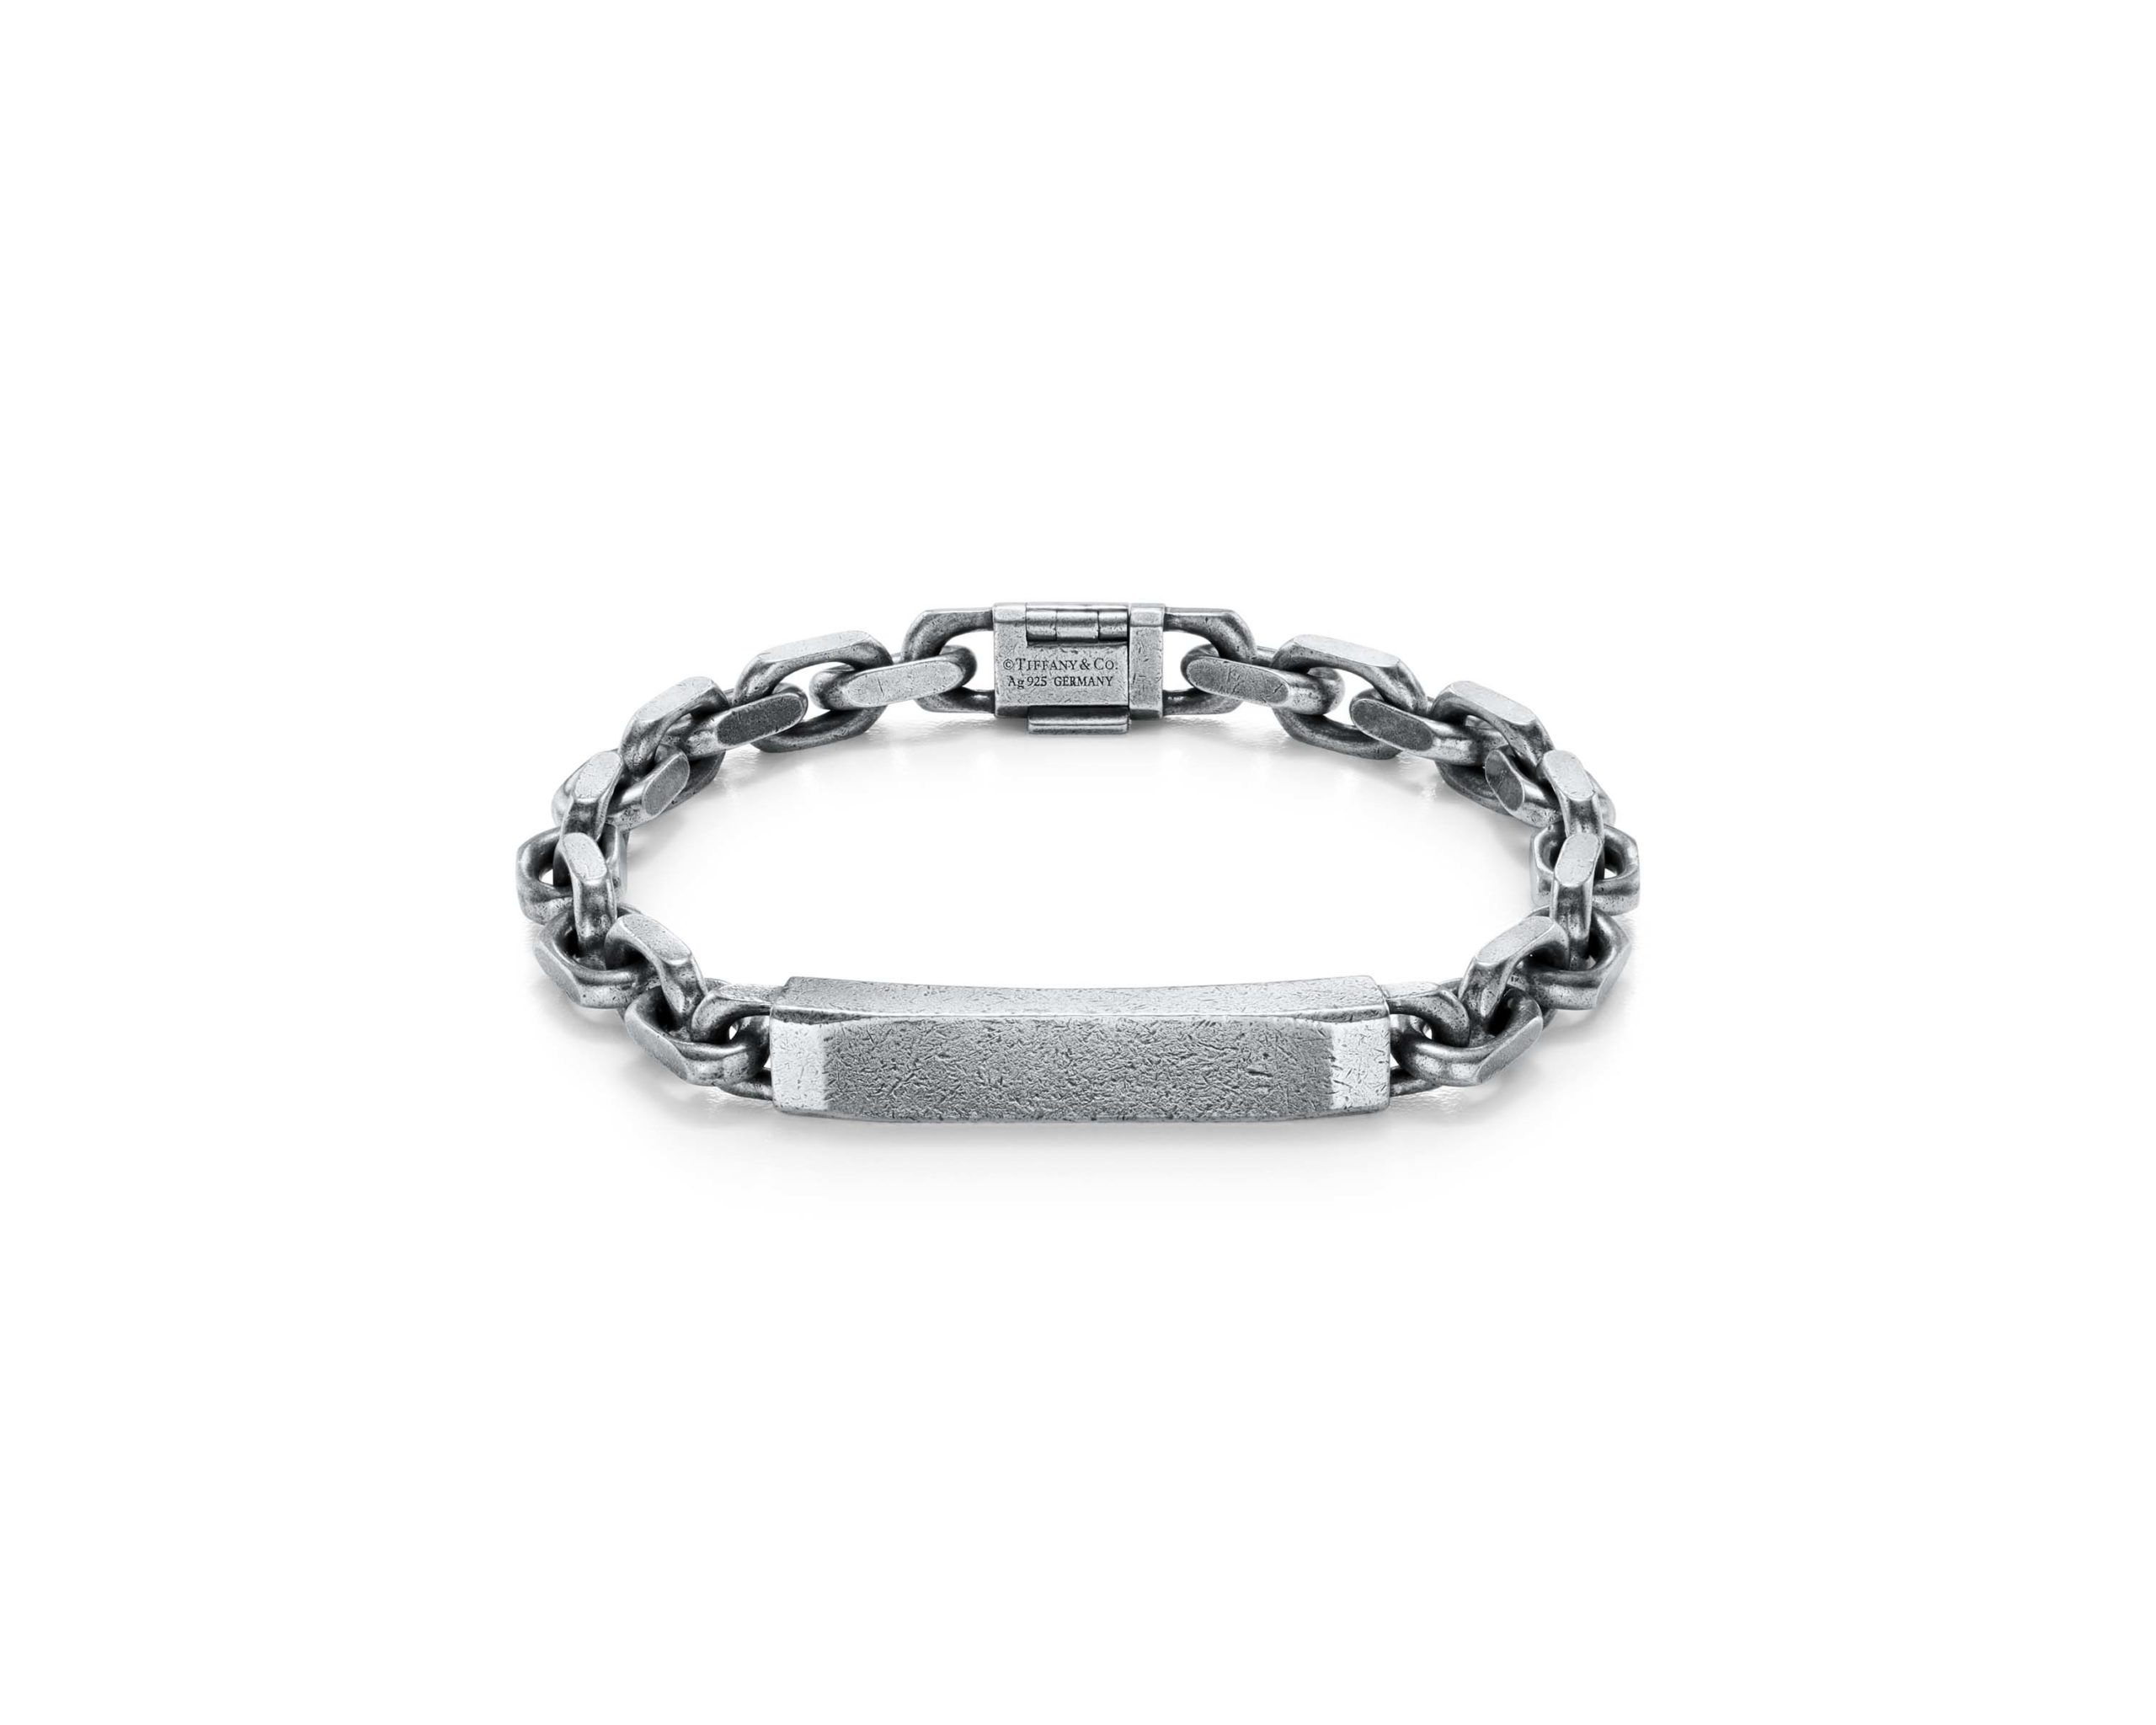 Tiffany 1837® Makers tumbled I.D. chain bracelet in sterling silver -  Tiffany